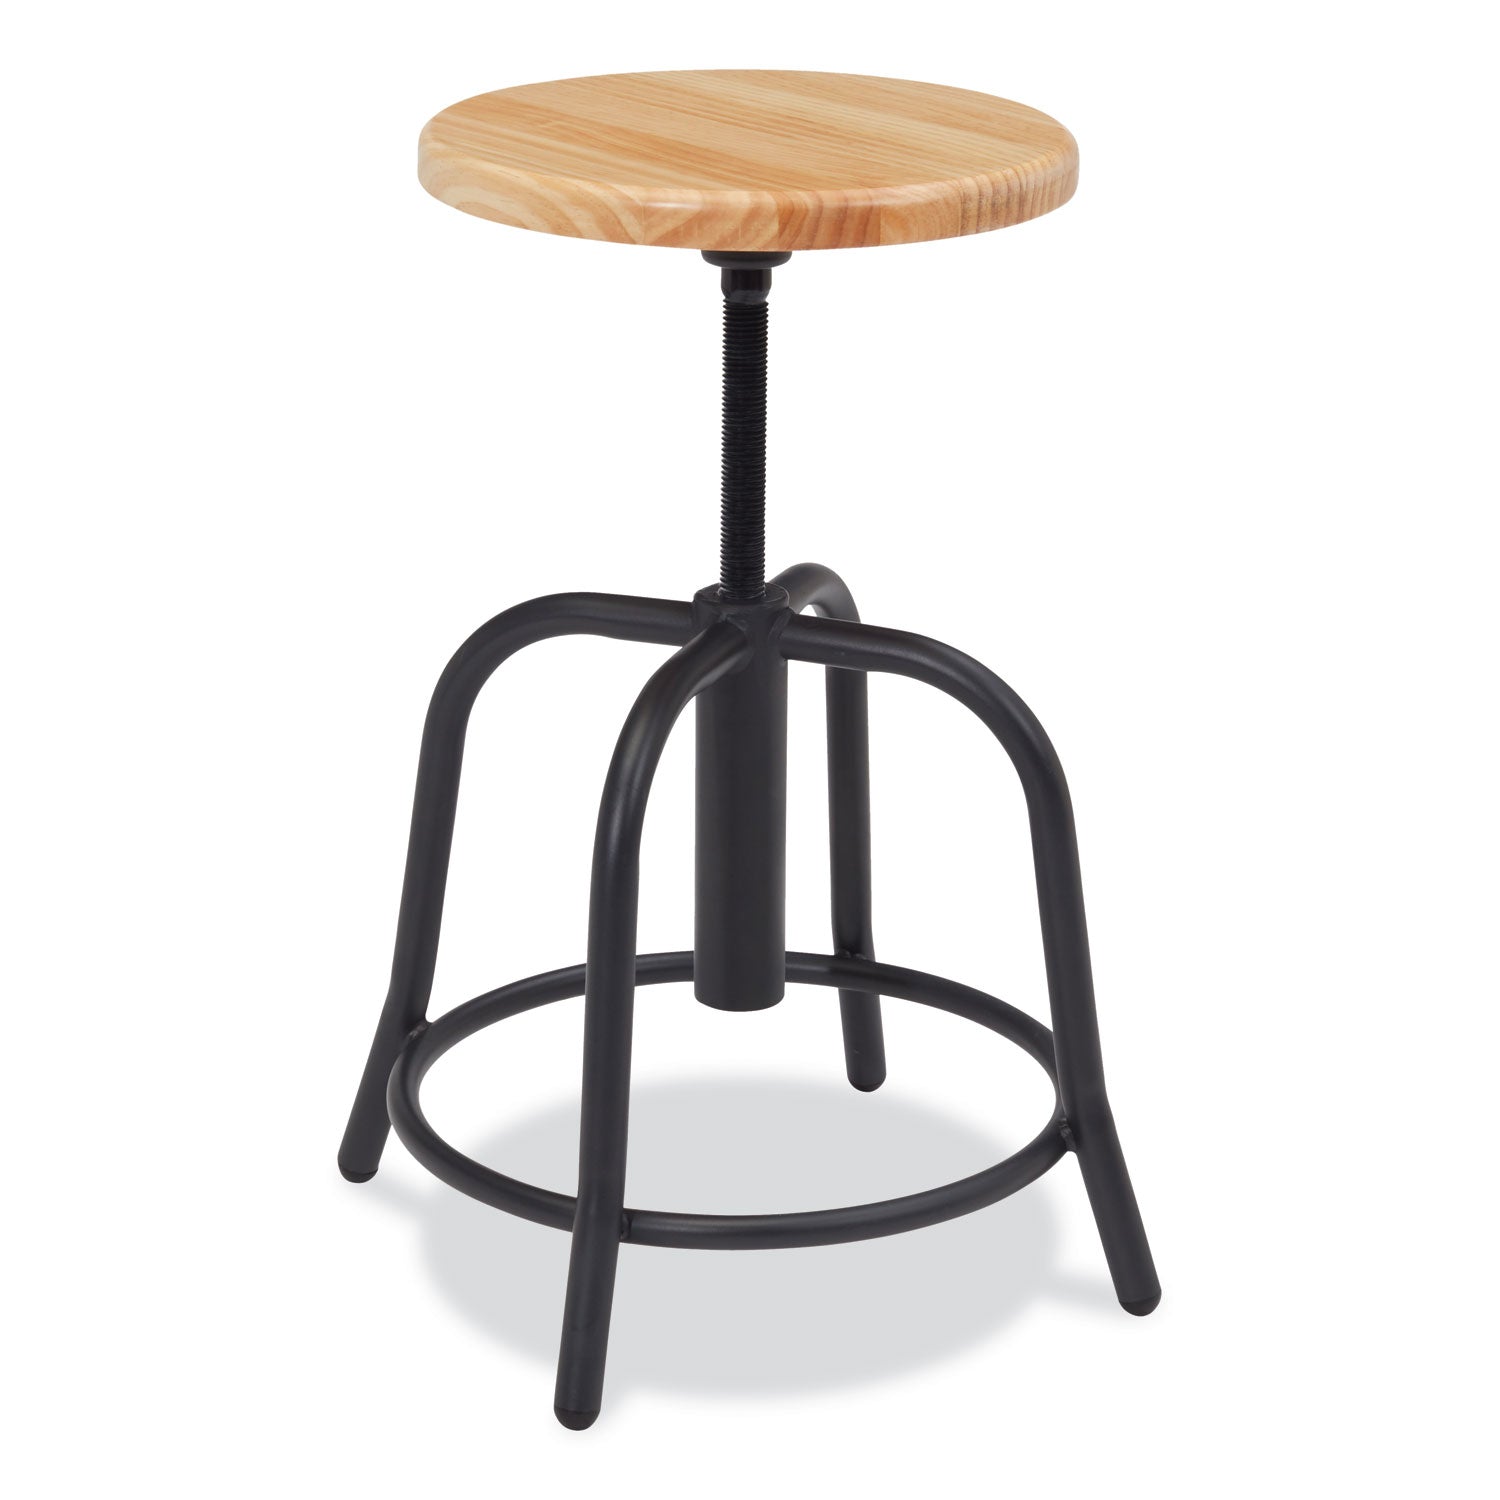 6800-series-height-adj-wood-seat-swivel-stool-supports-300-lb-19-25-seat-ht-maple-seat-black-base-ships-in-1-3-bus-days_nps6800w10 - 2